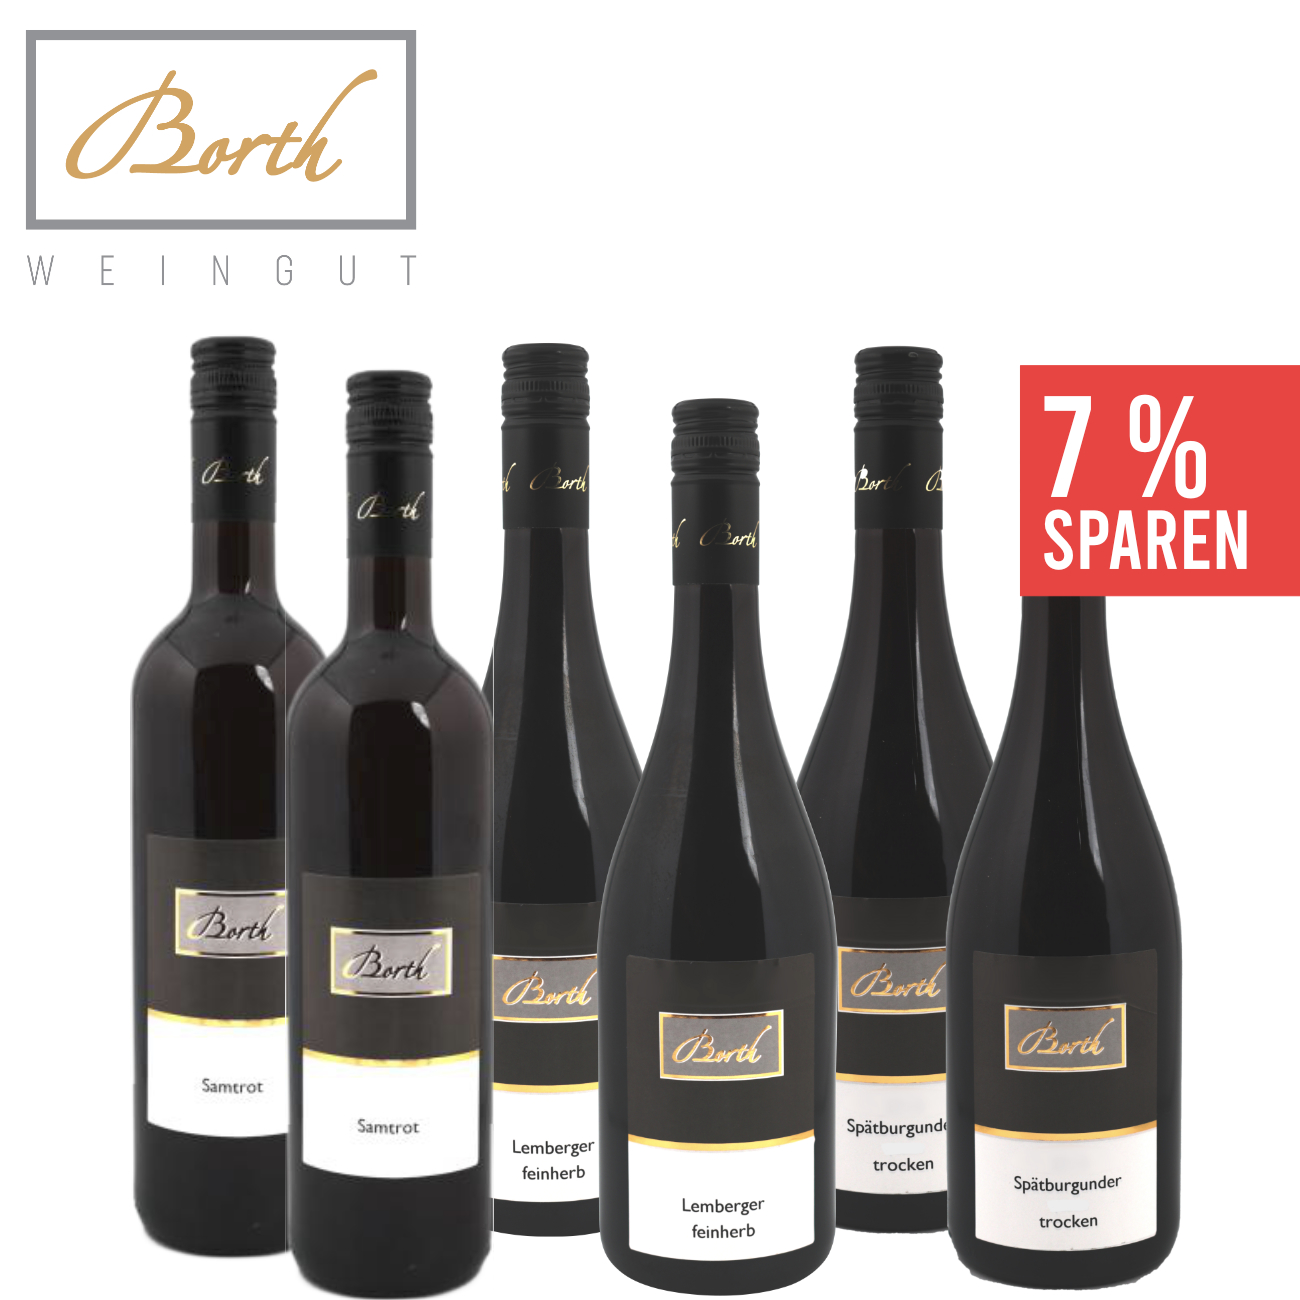 wines of members wein.plus wein.plus The Find+Buy our Find+Buy: |